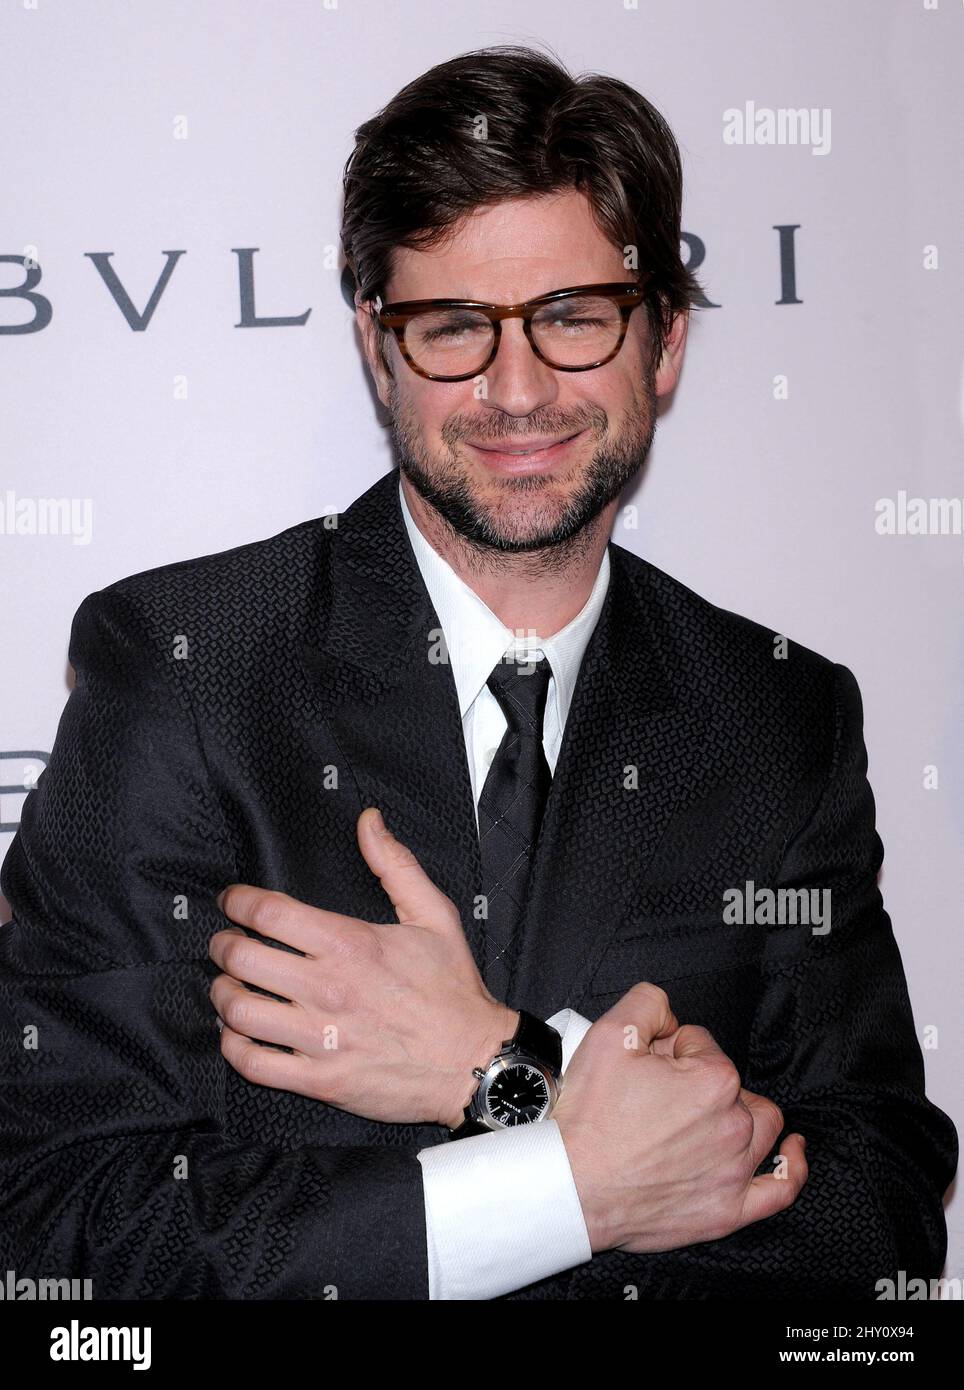 Gale Harold attending a photocall for a exhibition of Elizabeth Taylor's Bvlgari jewellery in Beverly Hills, California. Stock Photo